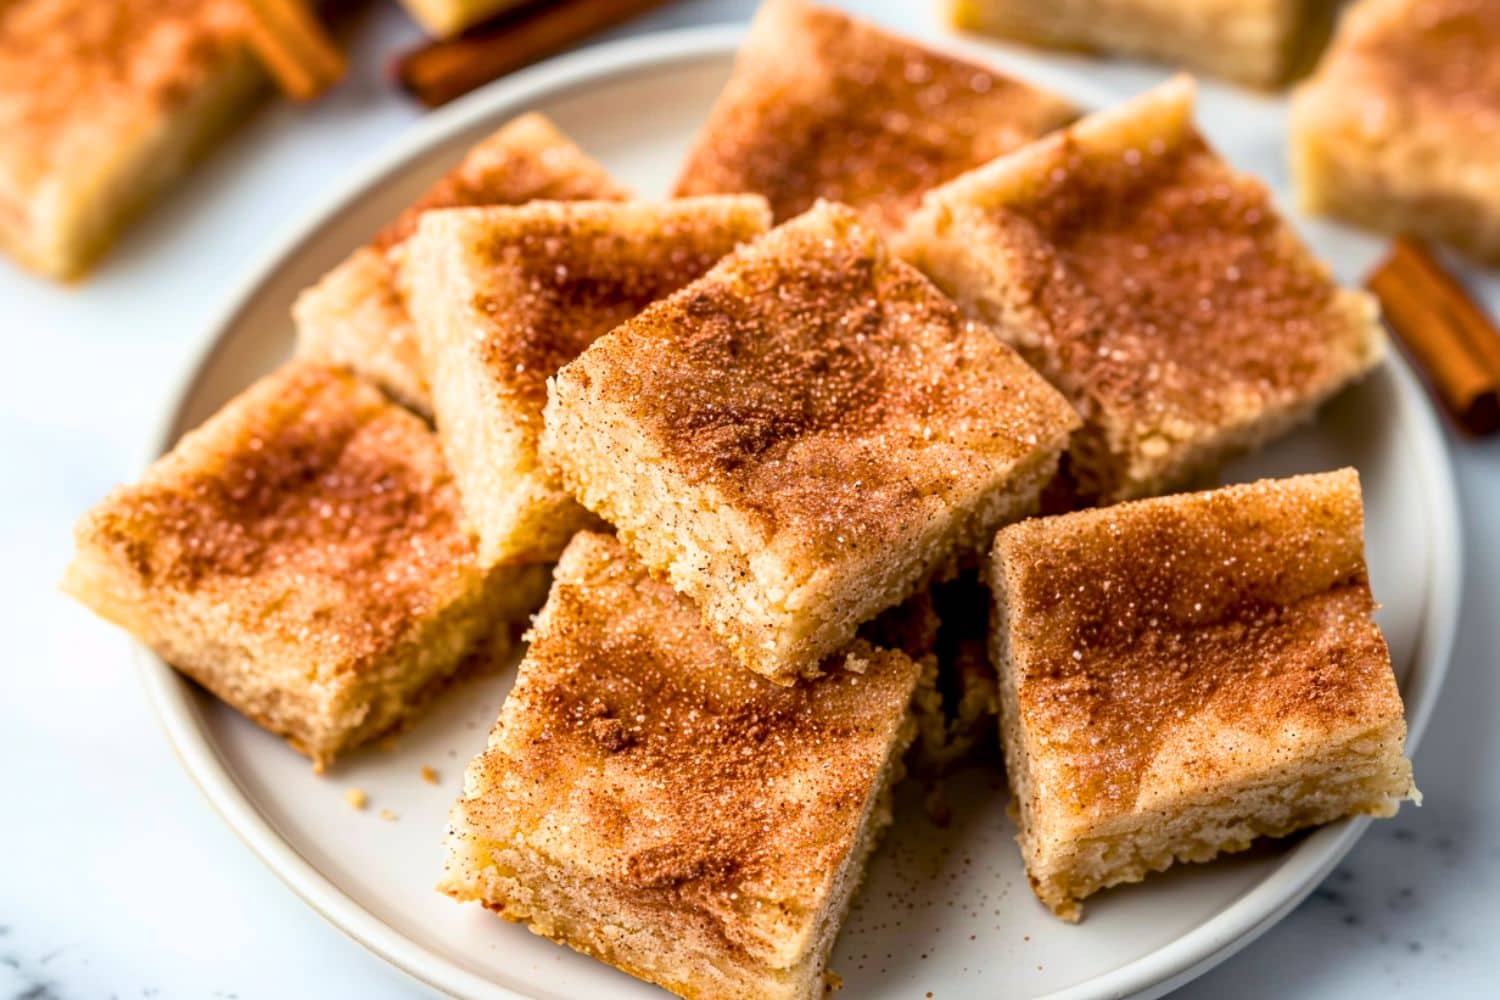 Snickerdoodle bars arranged in a white plate.